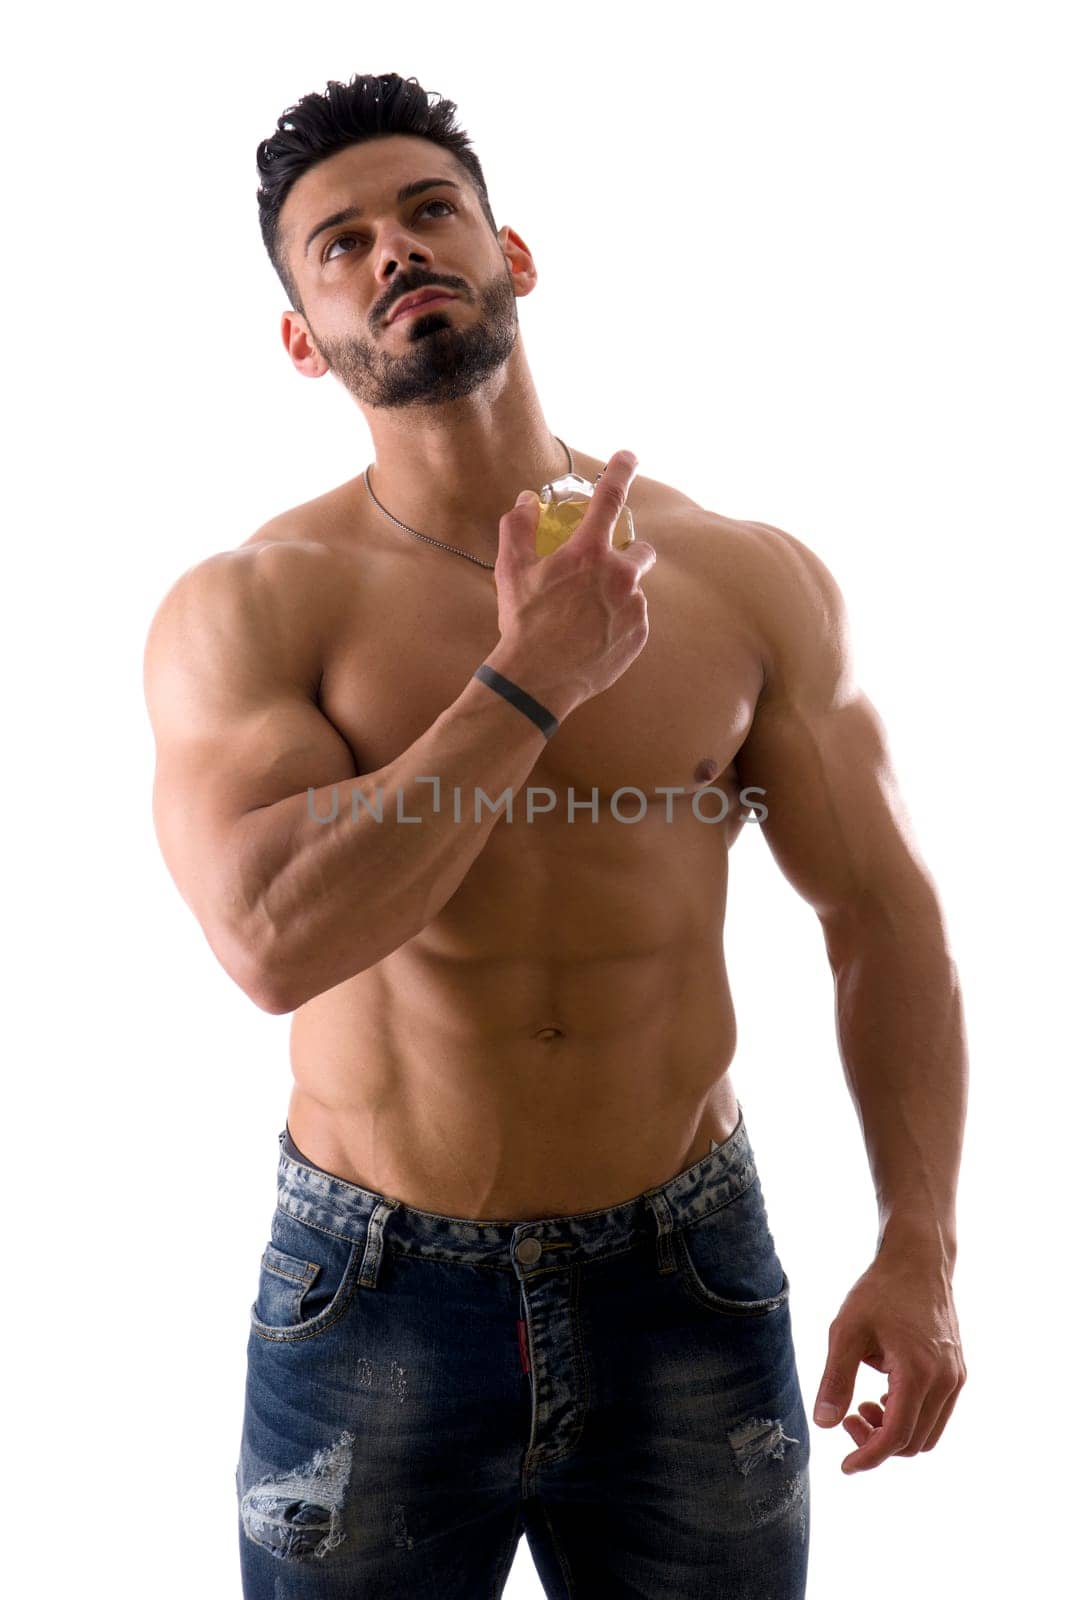 A Shirtless Muscular Man Holding a Cologne Bottle, Spraying Perfume, isolated on white in studio shot